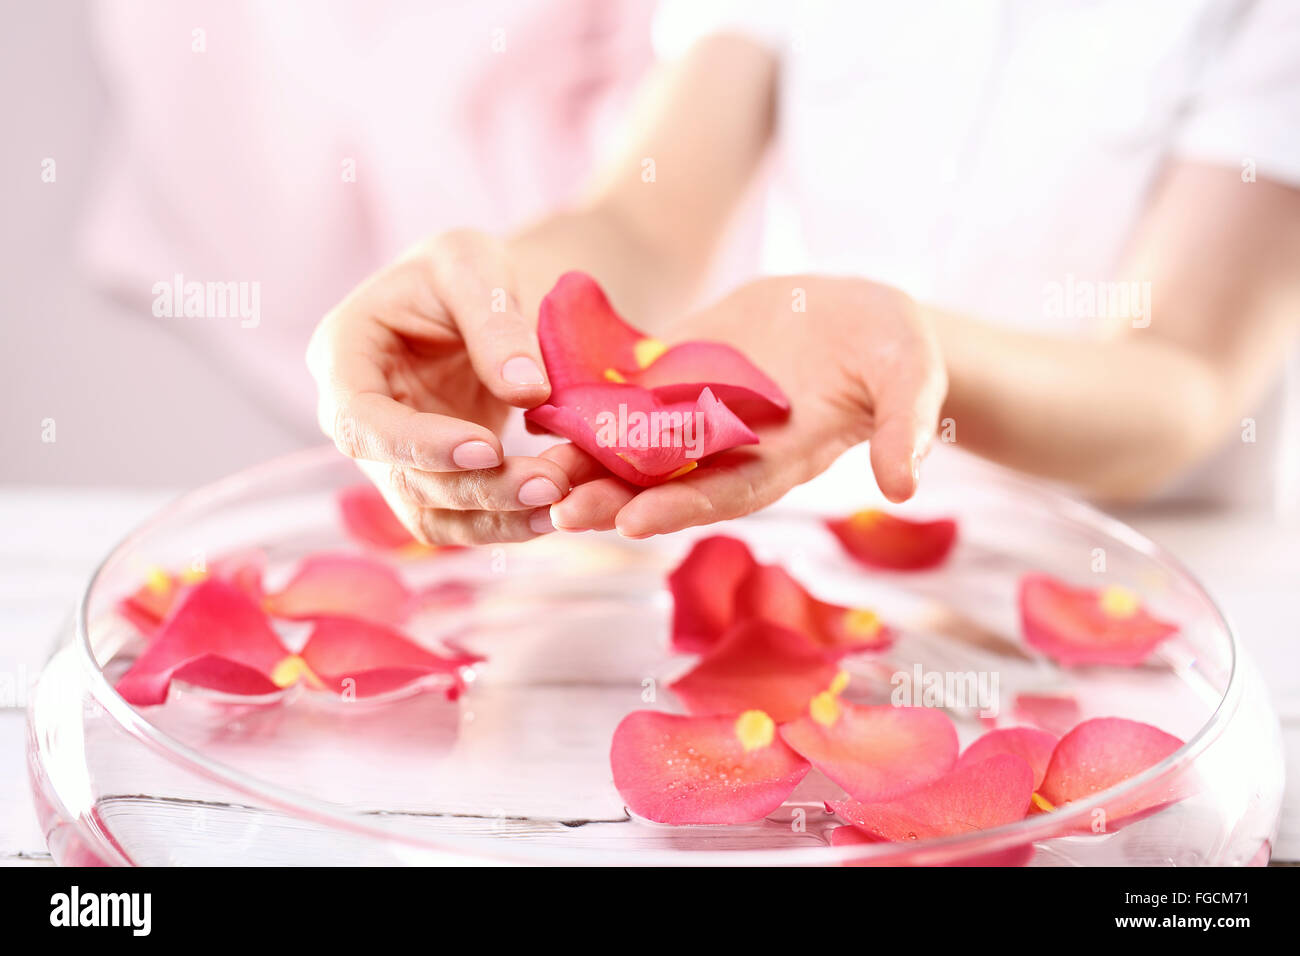 Care treatment of hands and nails woman hands over the bowl with rose petals. Hands women, rose bath nursing. Stock Photo